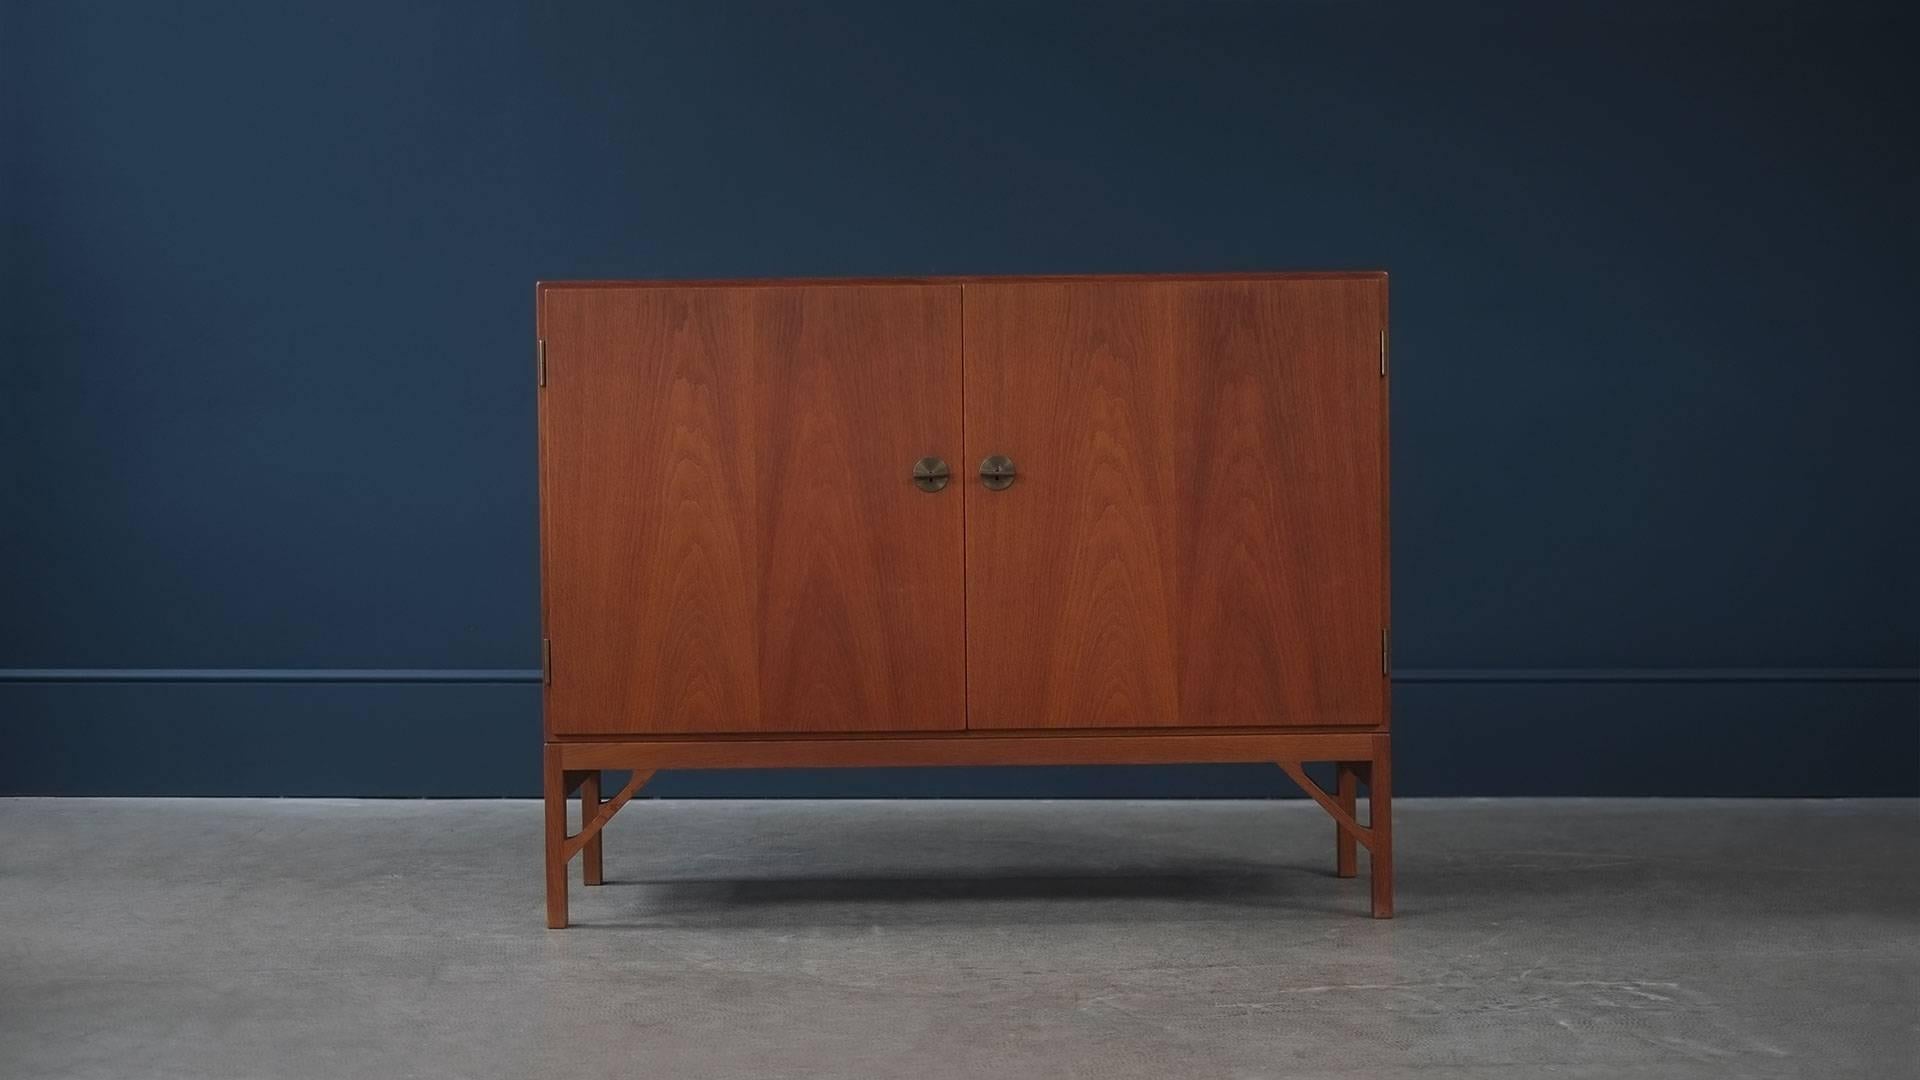 Wonderful cabinet in teak with contrasting interior in birch designed by Børge Mogensen for CM Madsen, Denmark. Super high quality and ultra-elegant with fantastic leg details and brass feature keys.